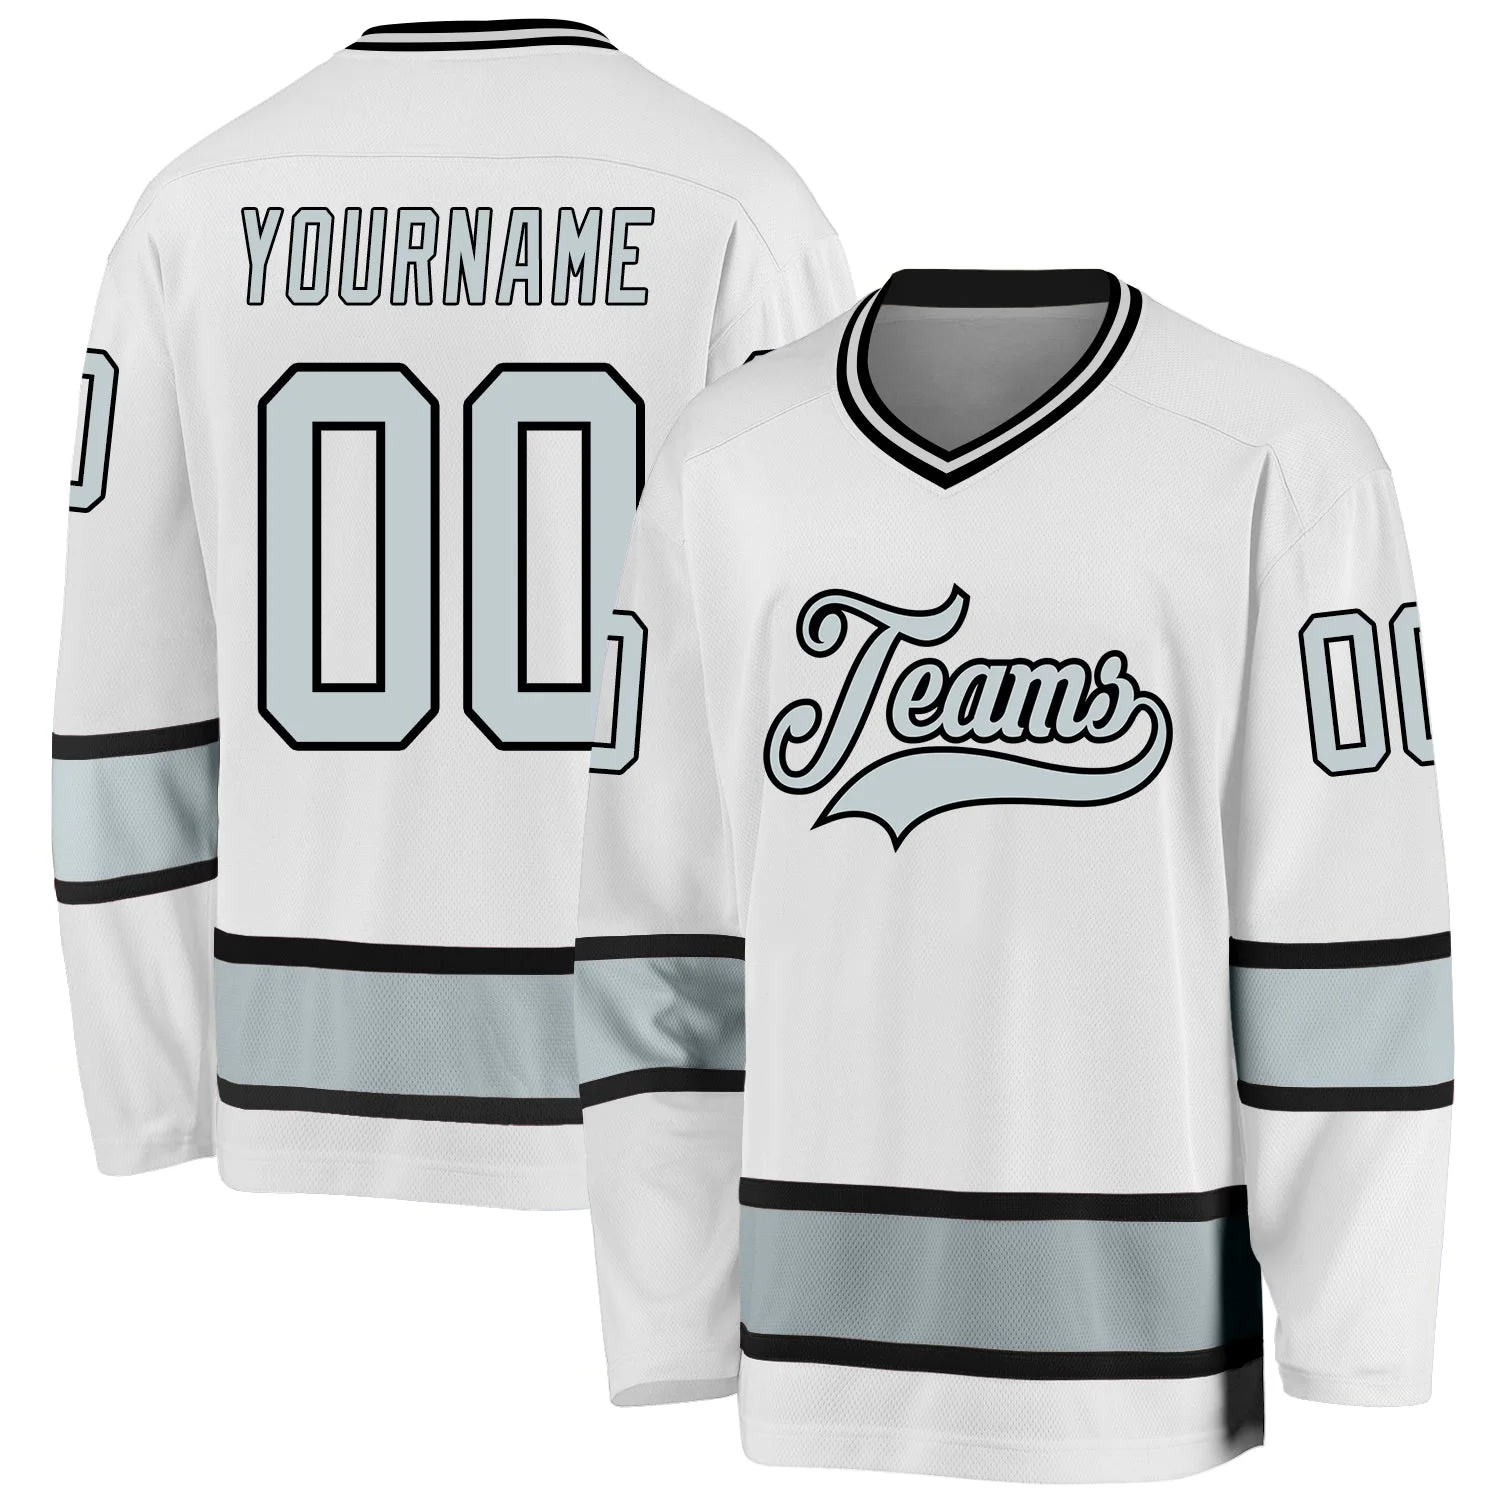 Stitched And Print White Silver-black Hockey Jersey Custom